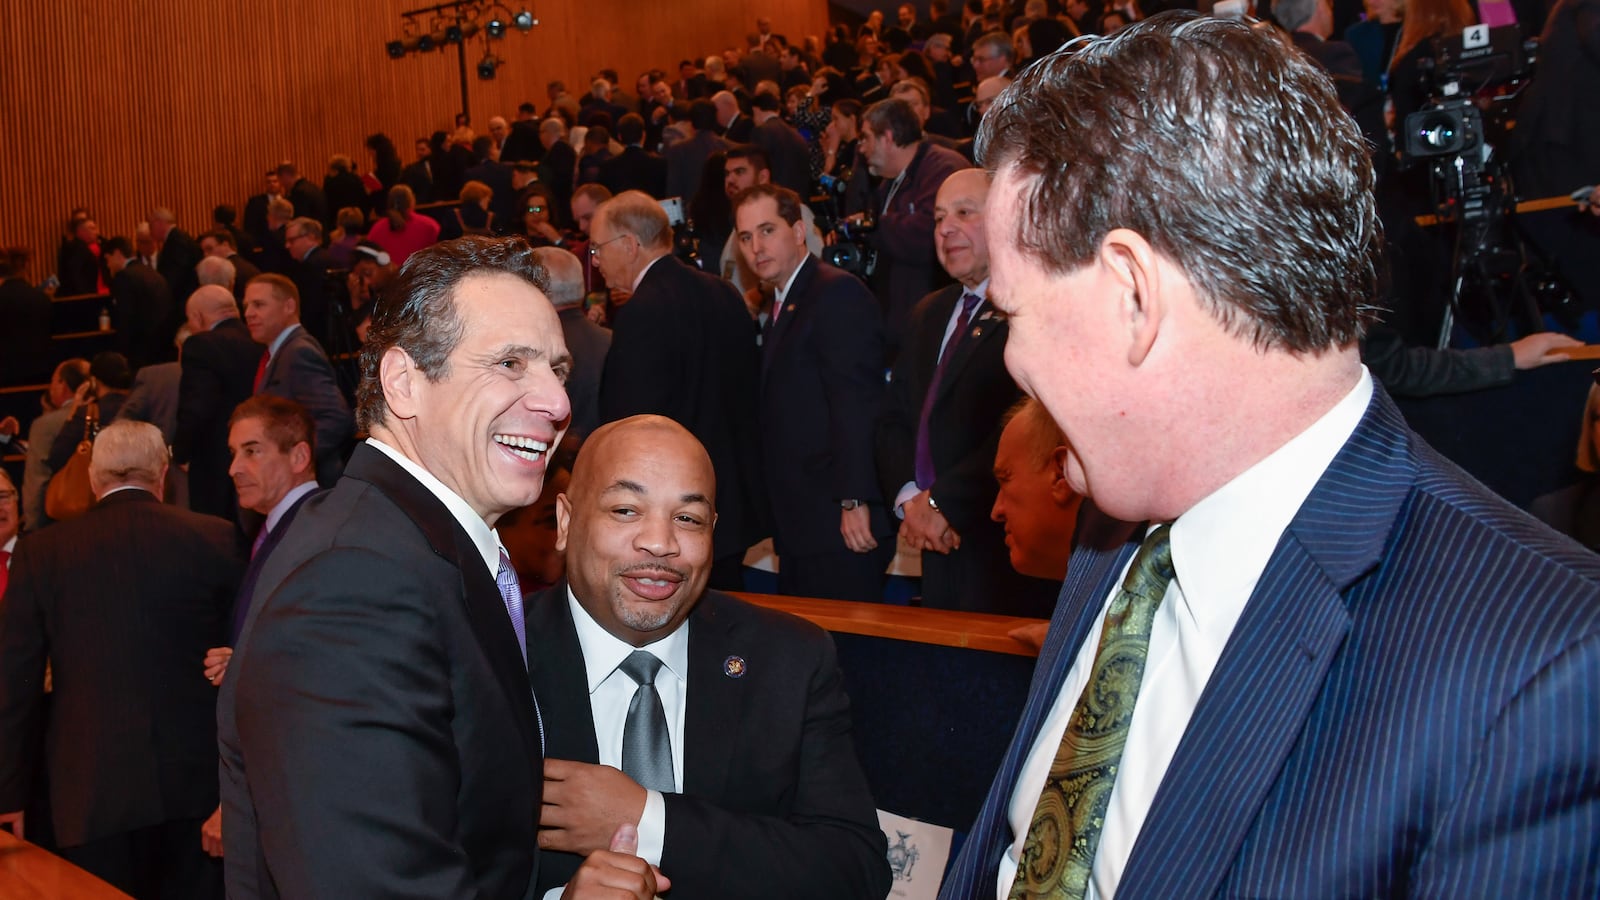 Governor Cuomo shakes hands with Assembly Speaker Heastie after his executive budget address.